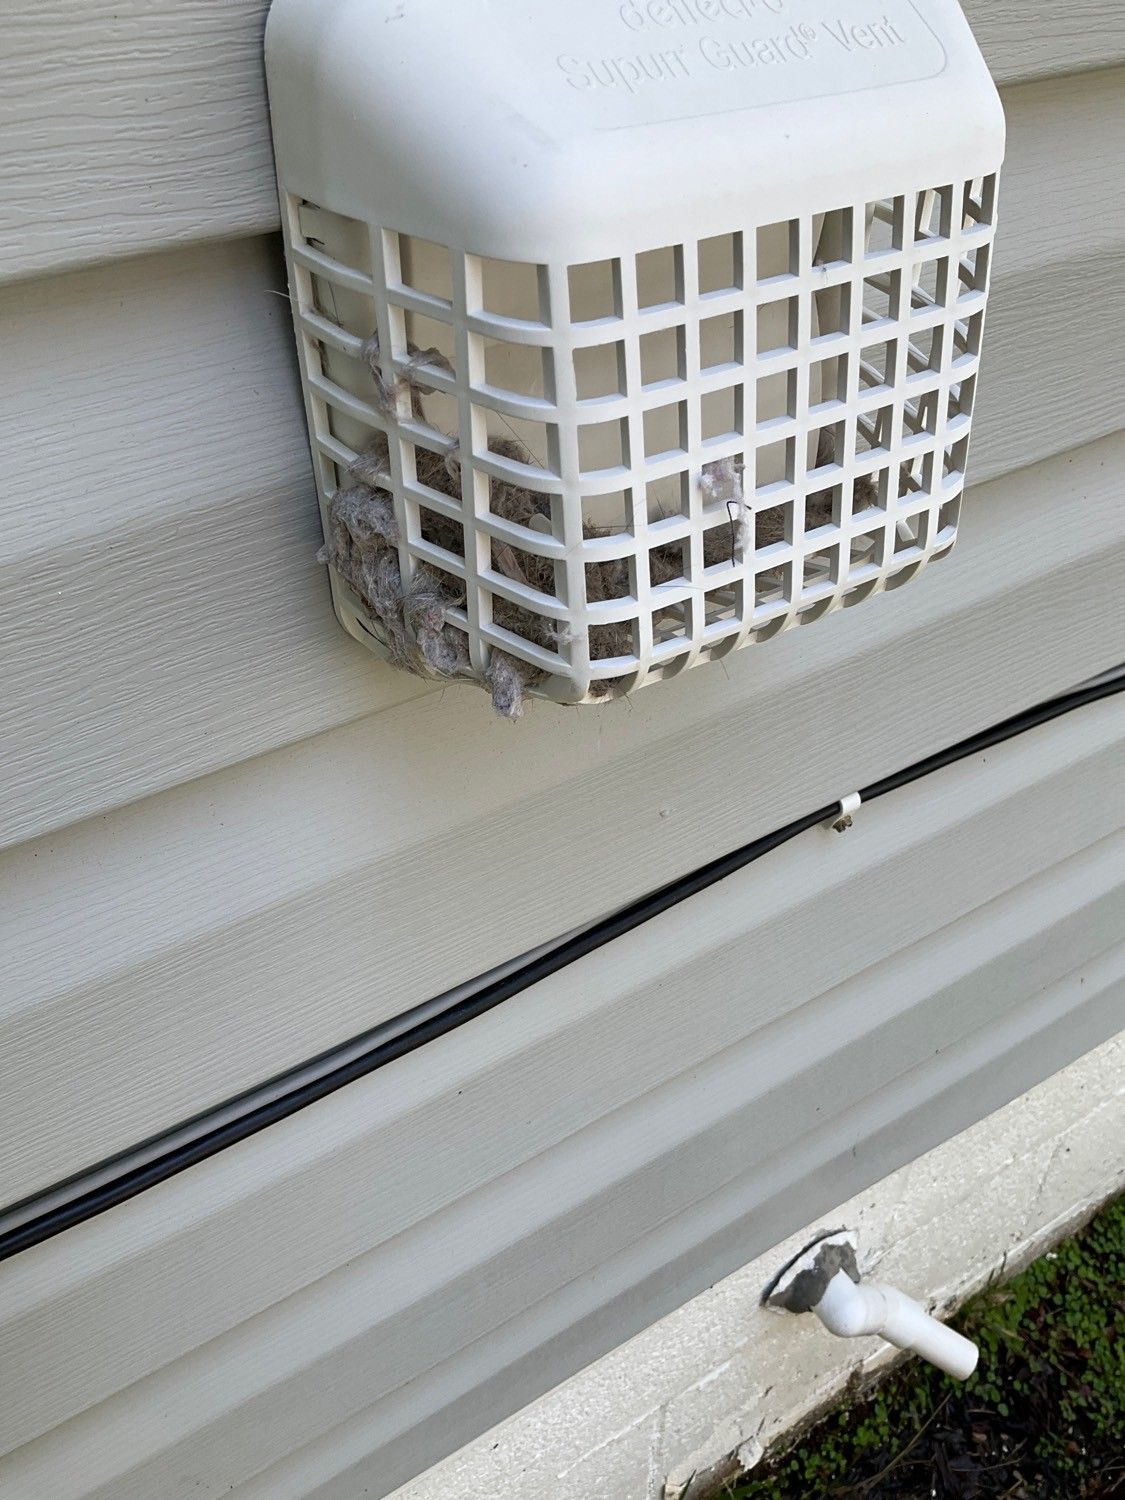 Enhanced Safety Importance Of A Proper Dryer Vent Cover 